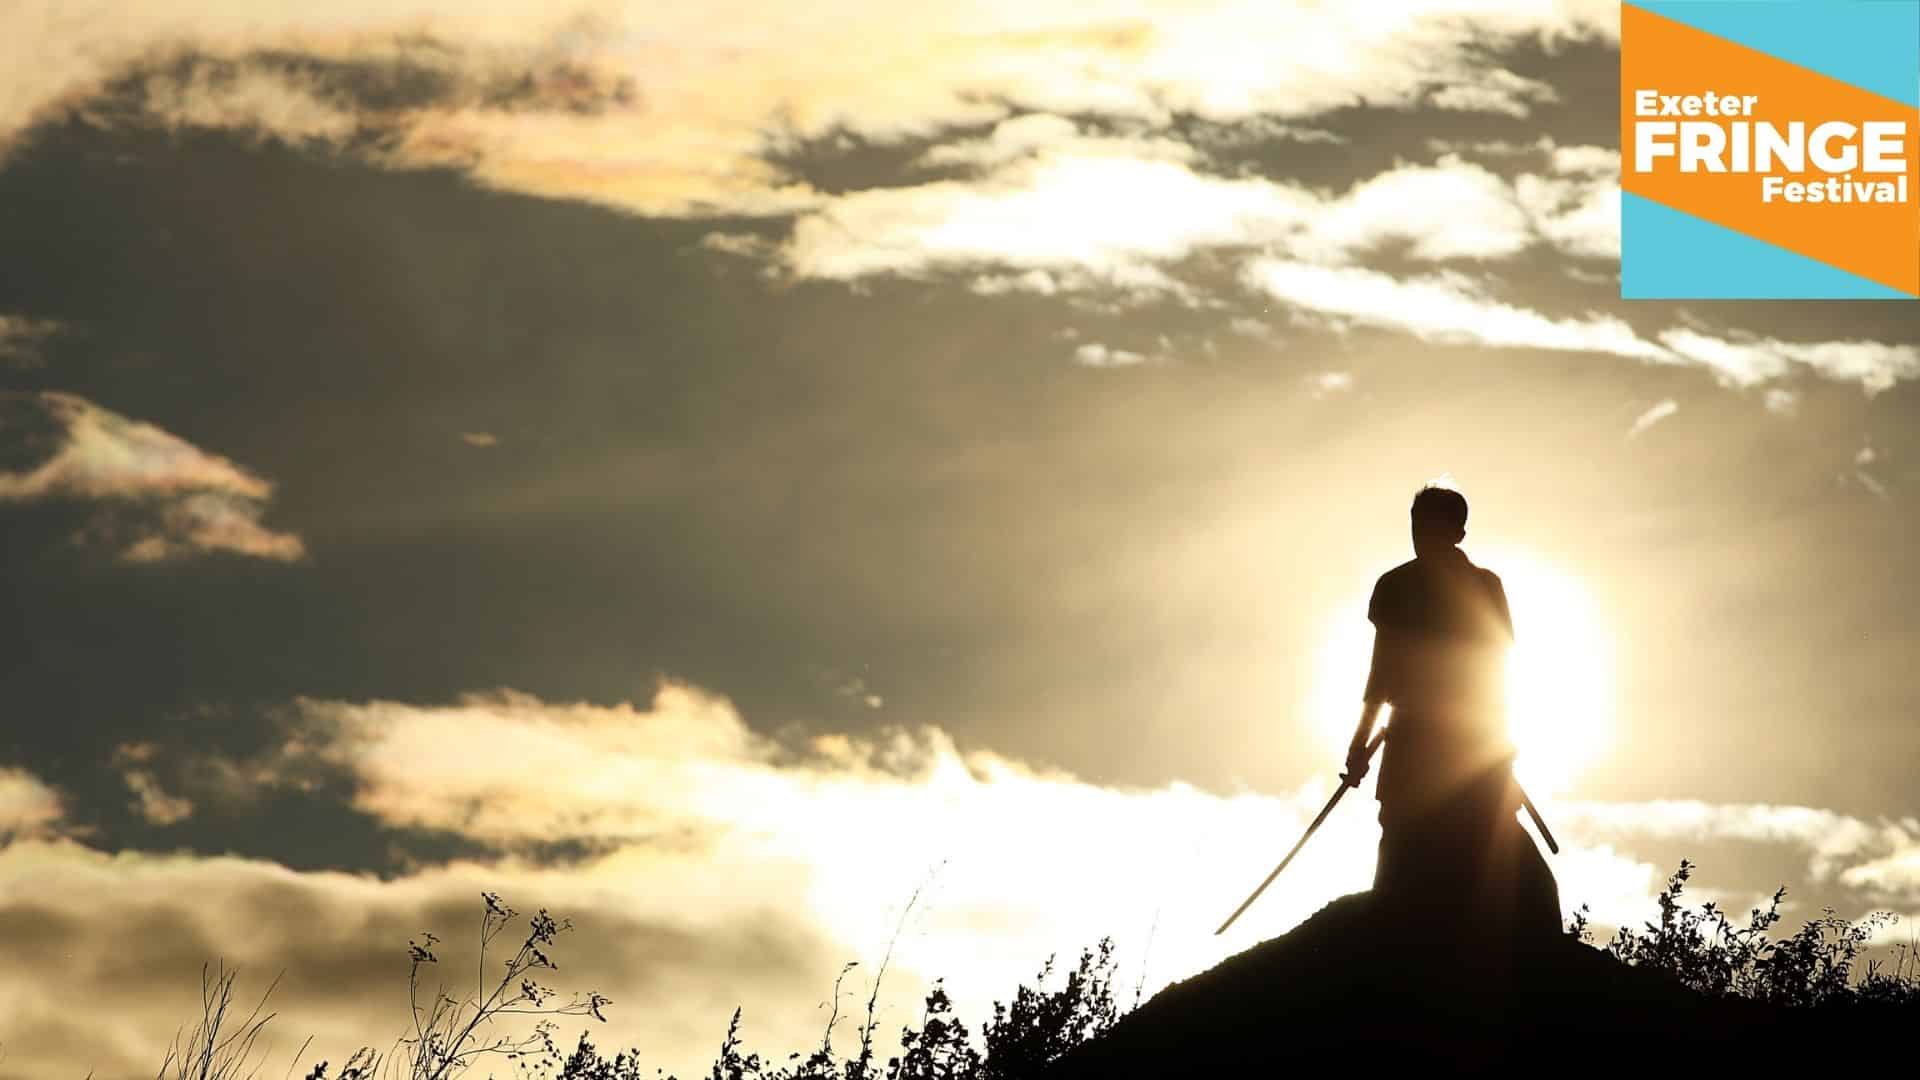 Promotional image for The Wounded King - A shadowy figure against a yellow horizon, he's holding a samurai sword pointing down